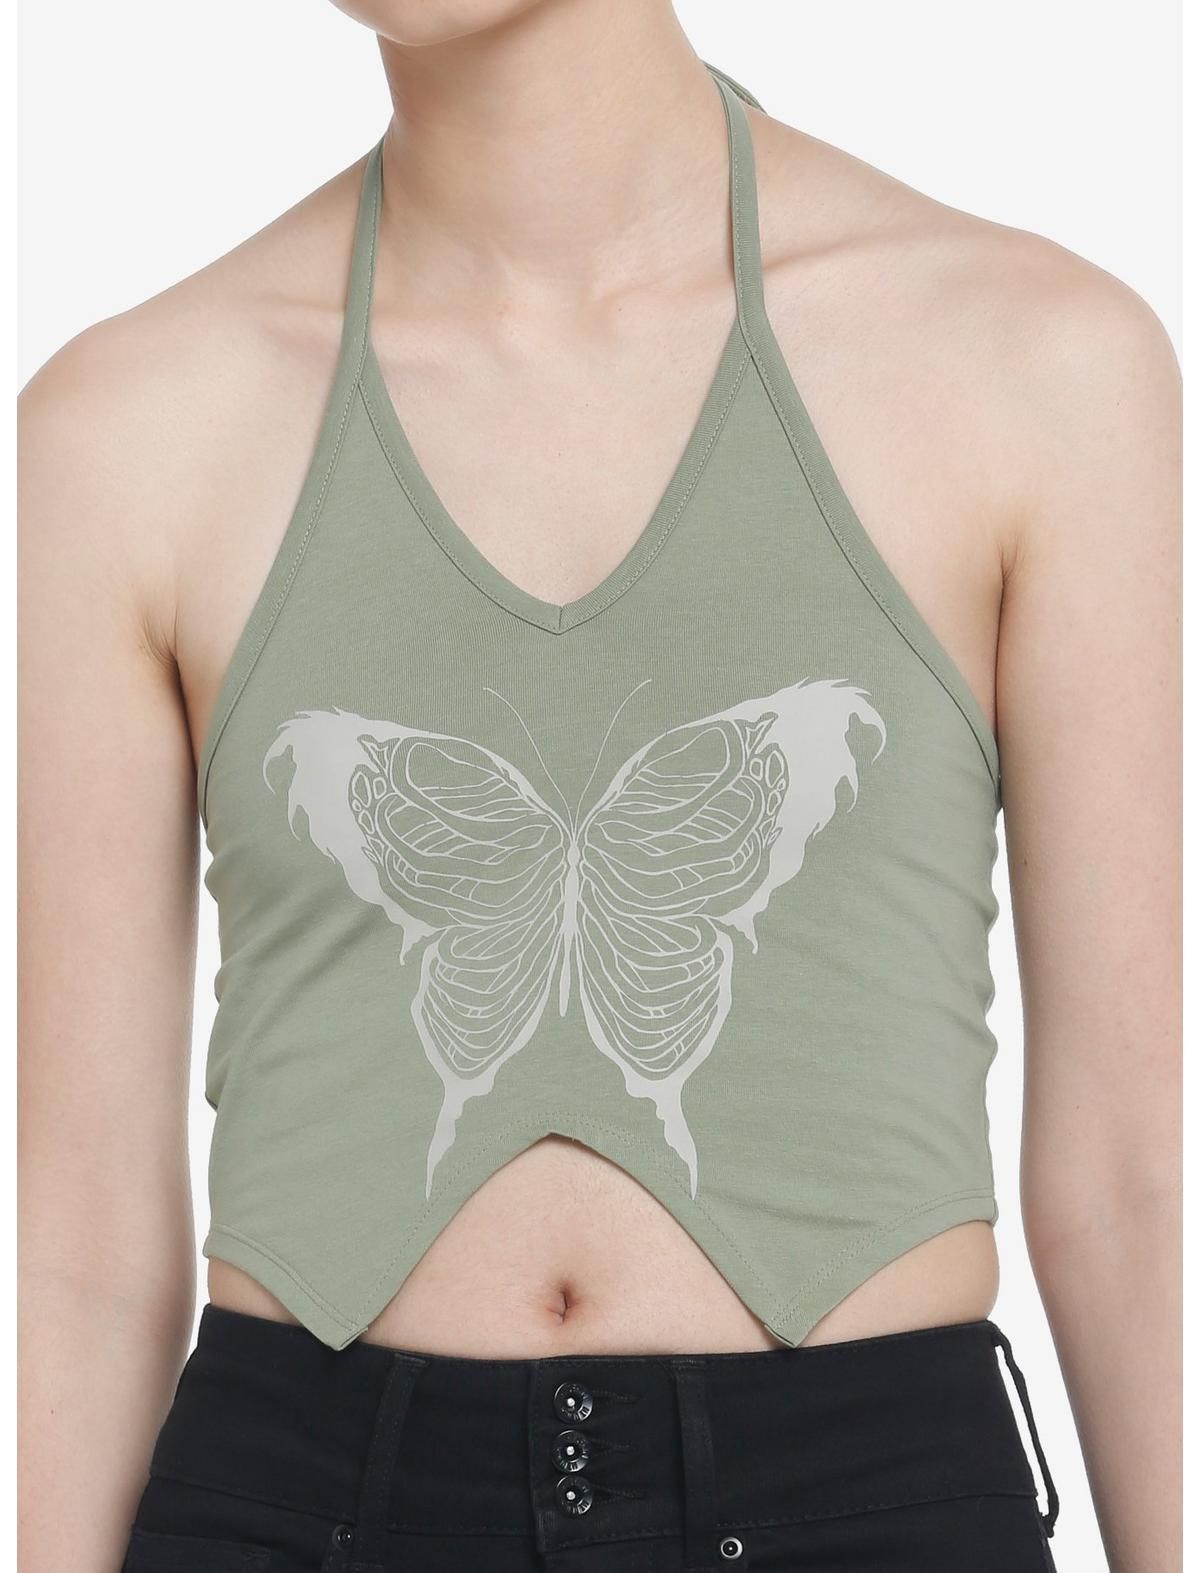 Thorn & Fable Death Butterfly V-Hem Crop Girls Halter Tank Top | Hot Topic | Hot Topic